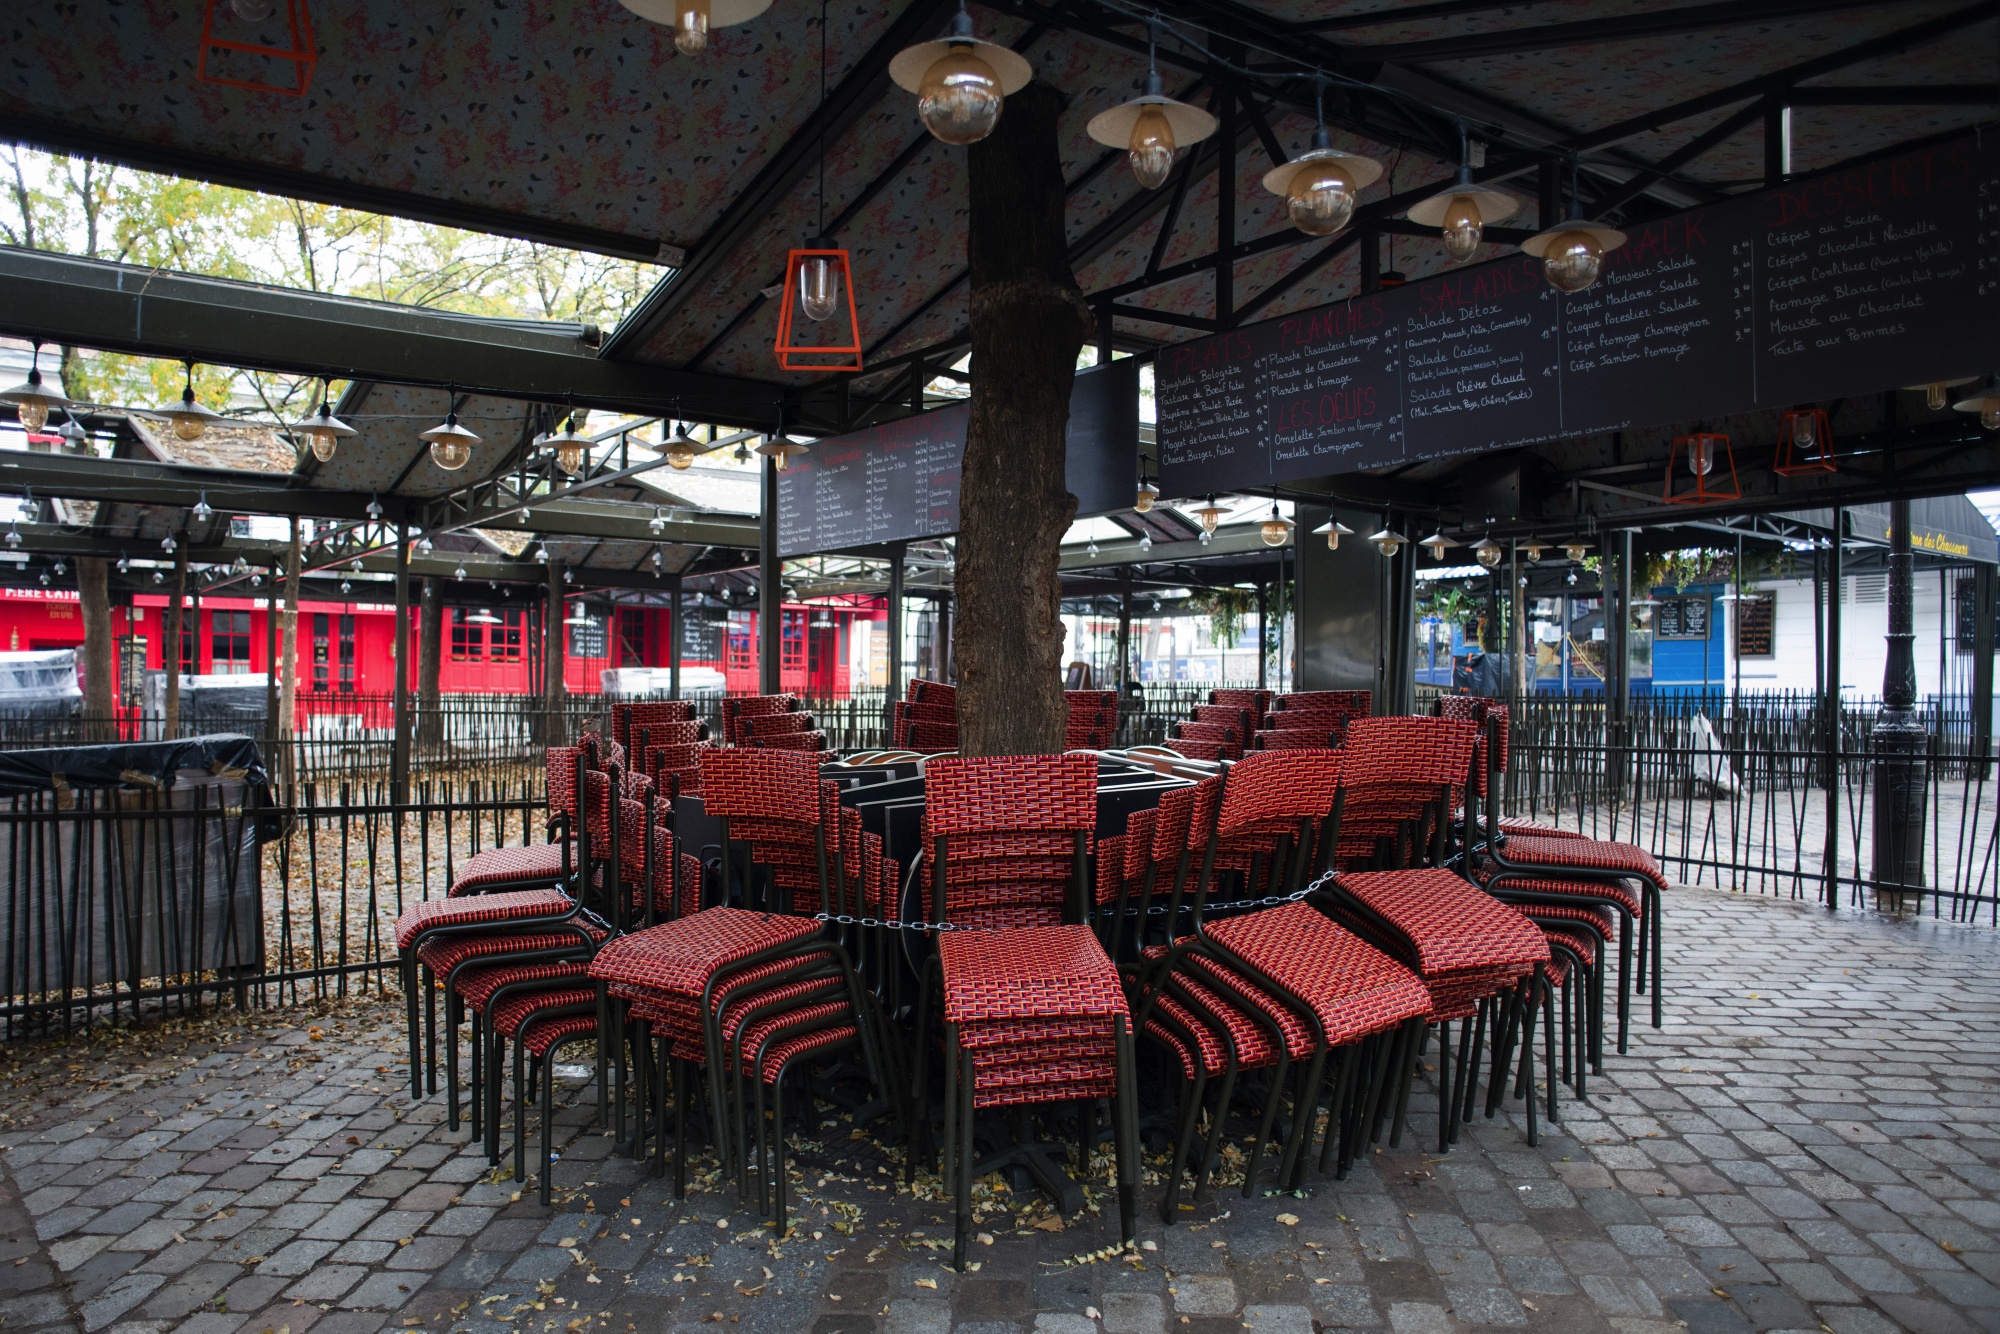 Chained up restaurant seating during the Covid crisis in Paris, in 2020.